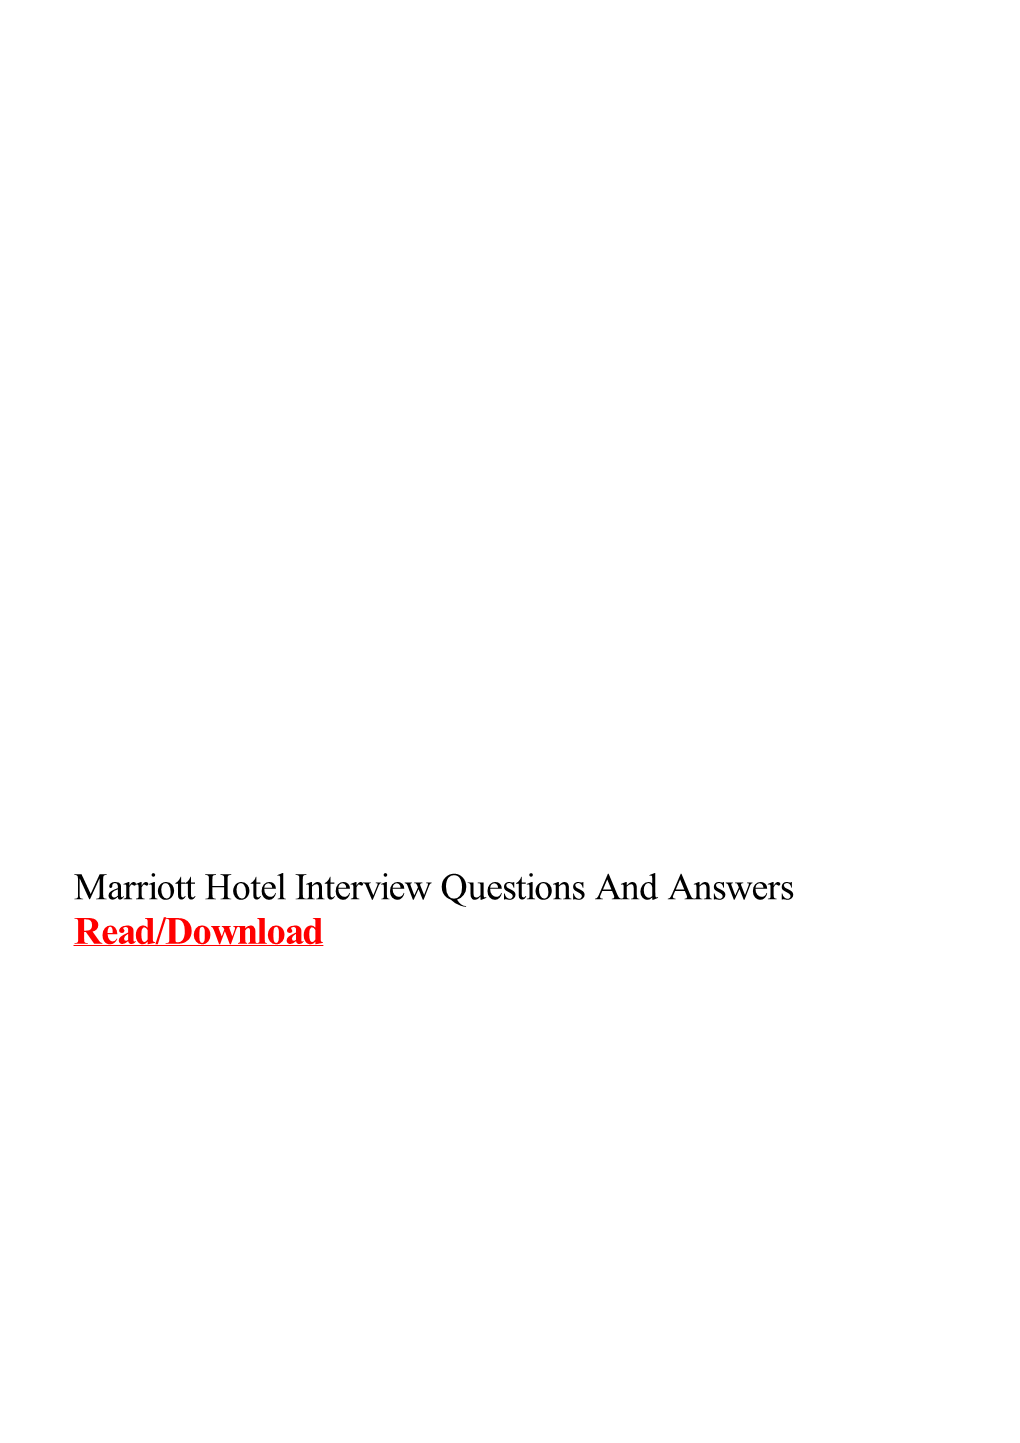 Marriott Hotel Interview Questions and Answers